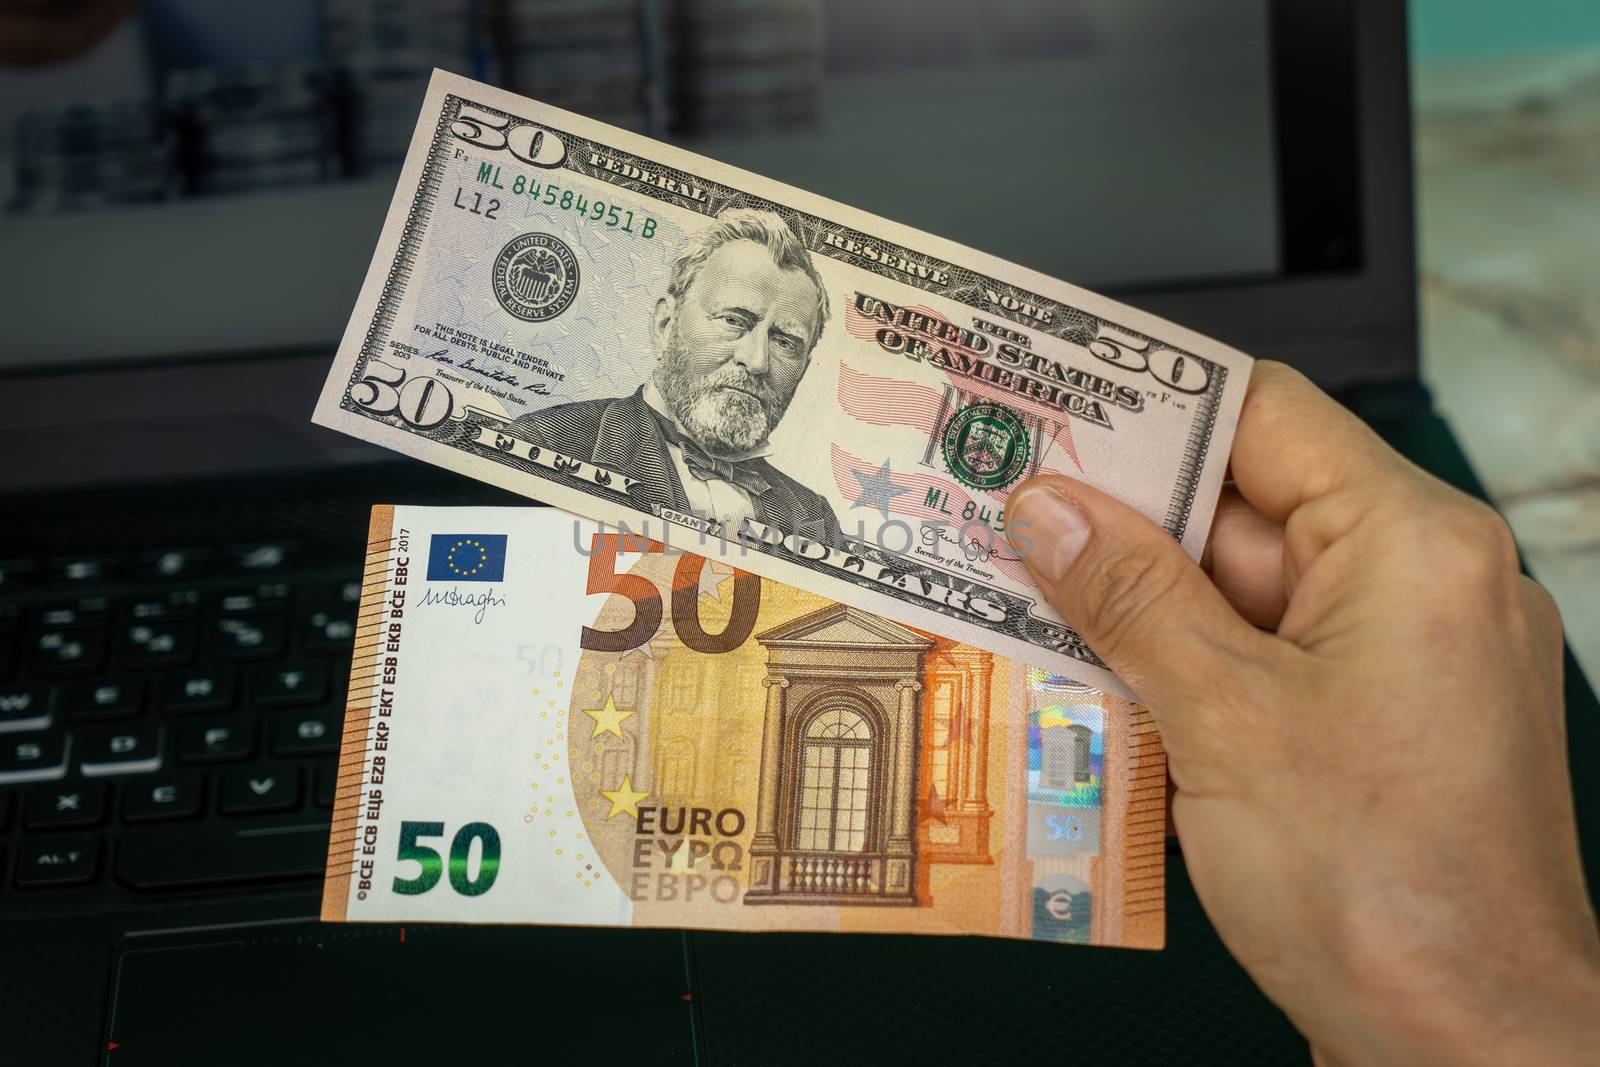 A hand holding two banknotes, one of fifty American dollars and the other of fifty euros